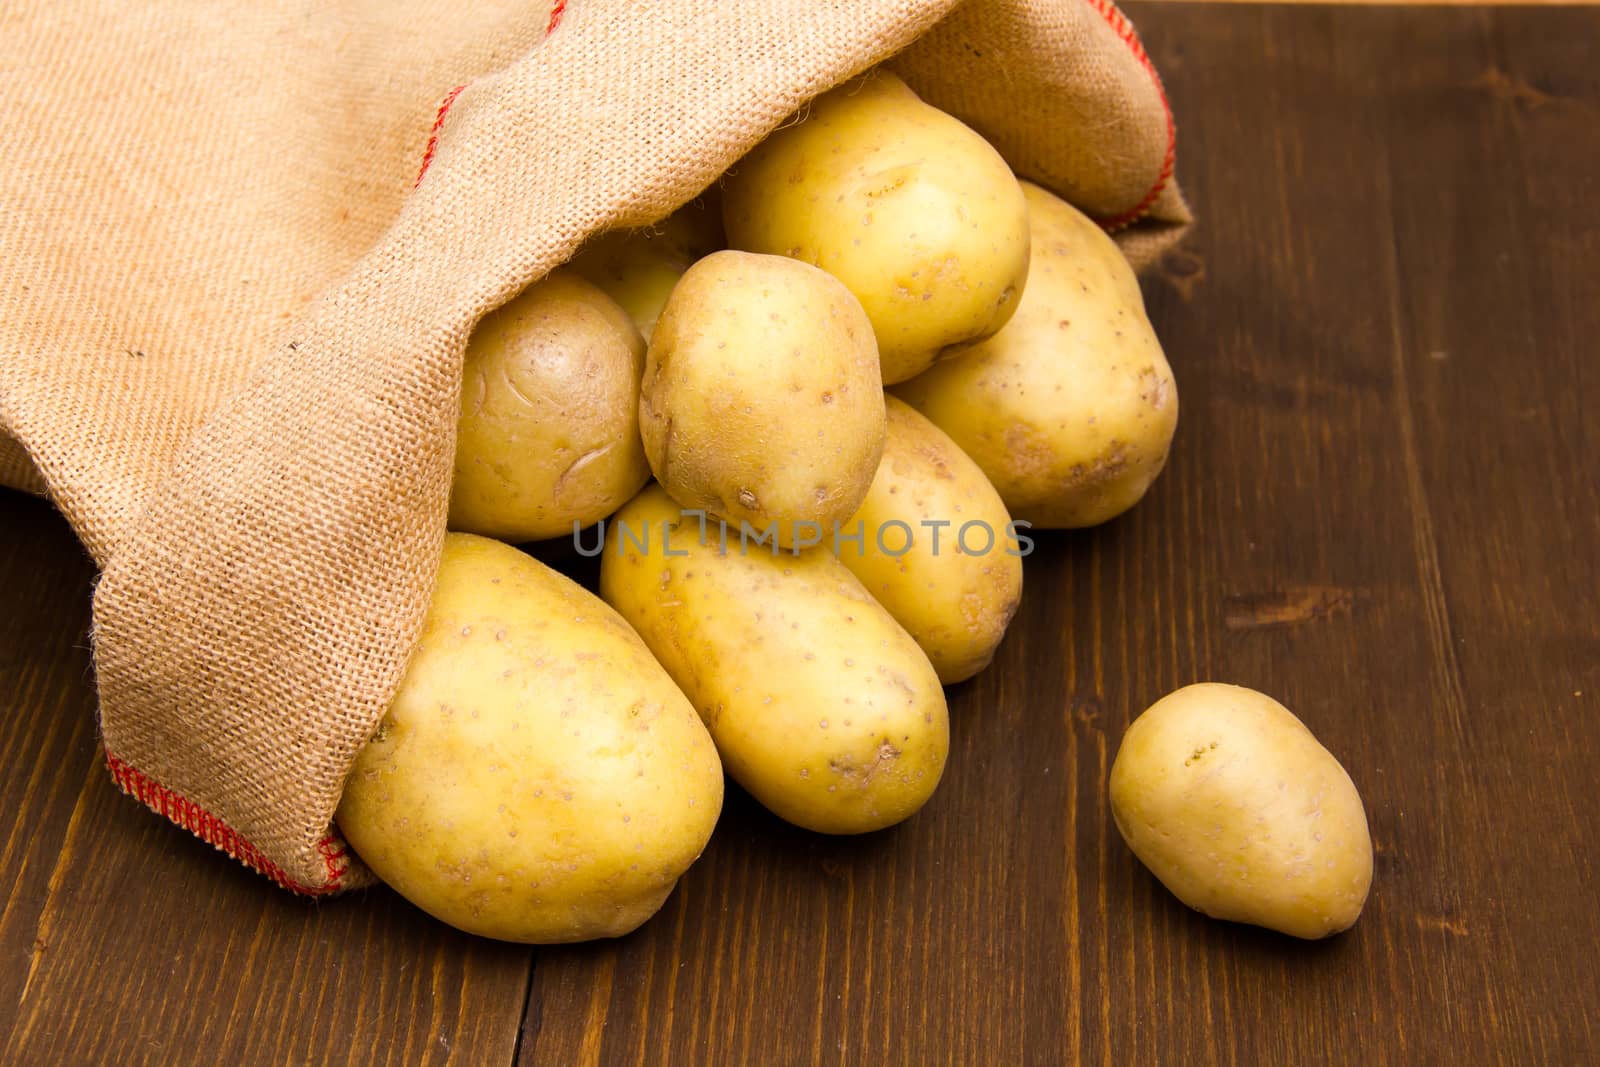 Sack of potatoes on wooden table seen up close